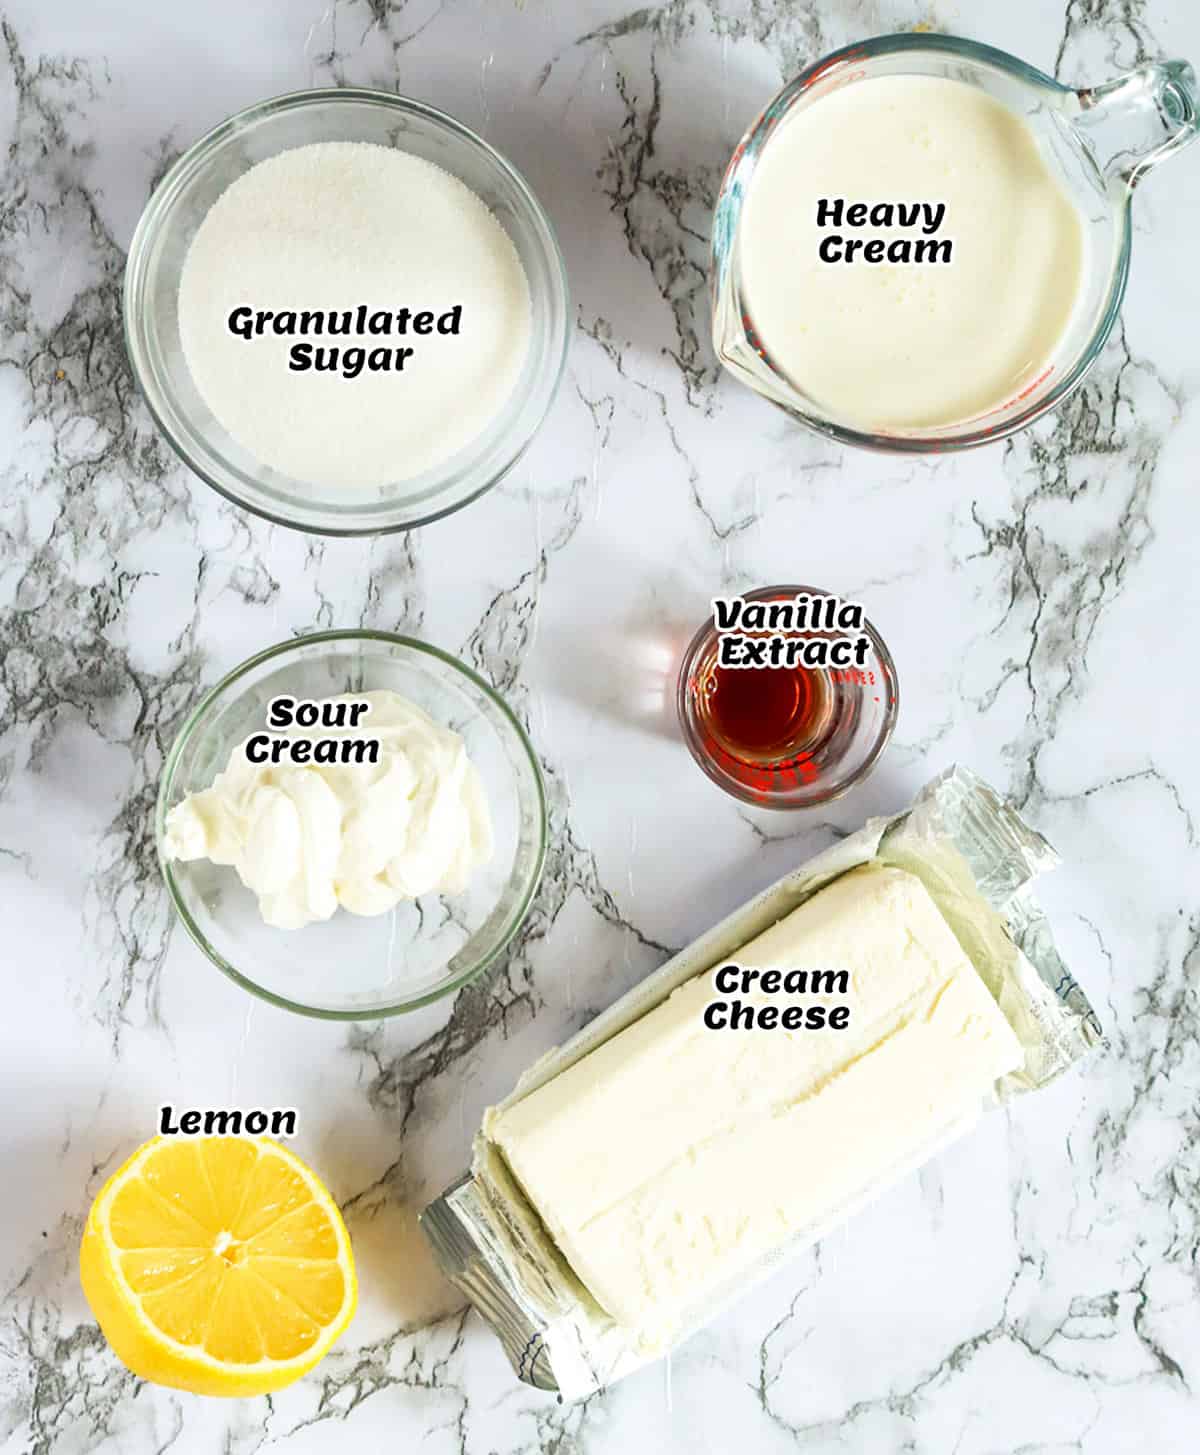 What you need to make the no-bake cheesecake filling